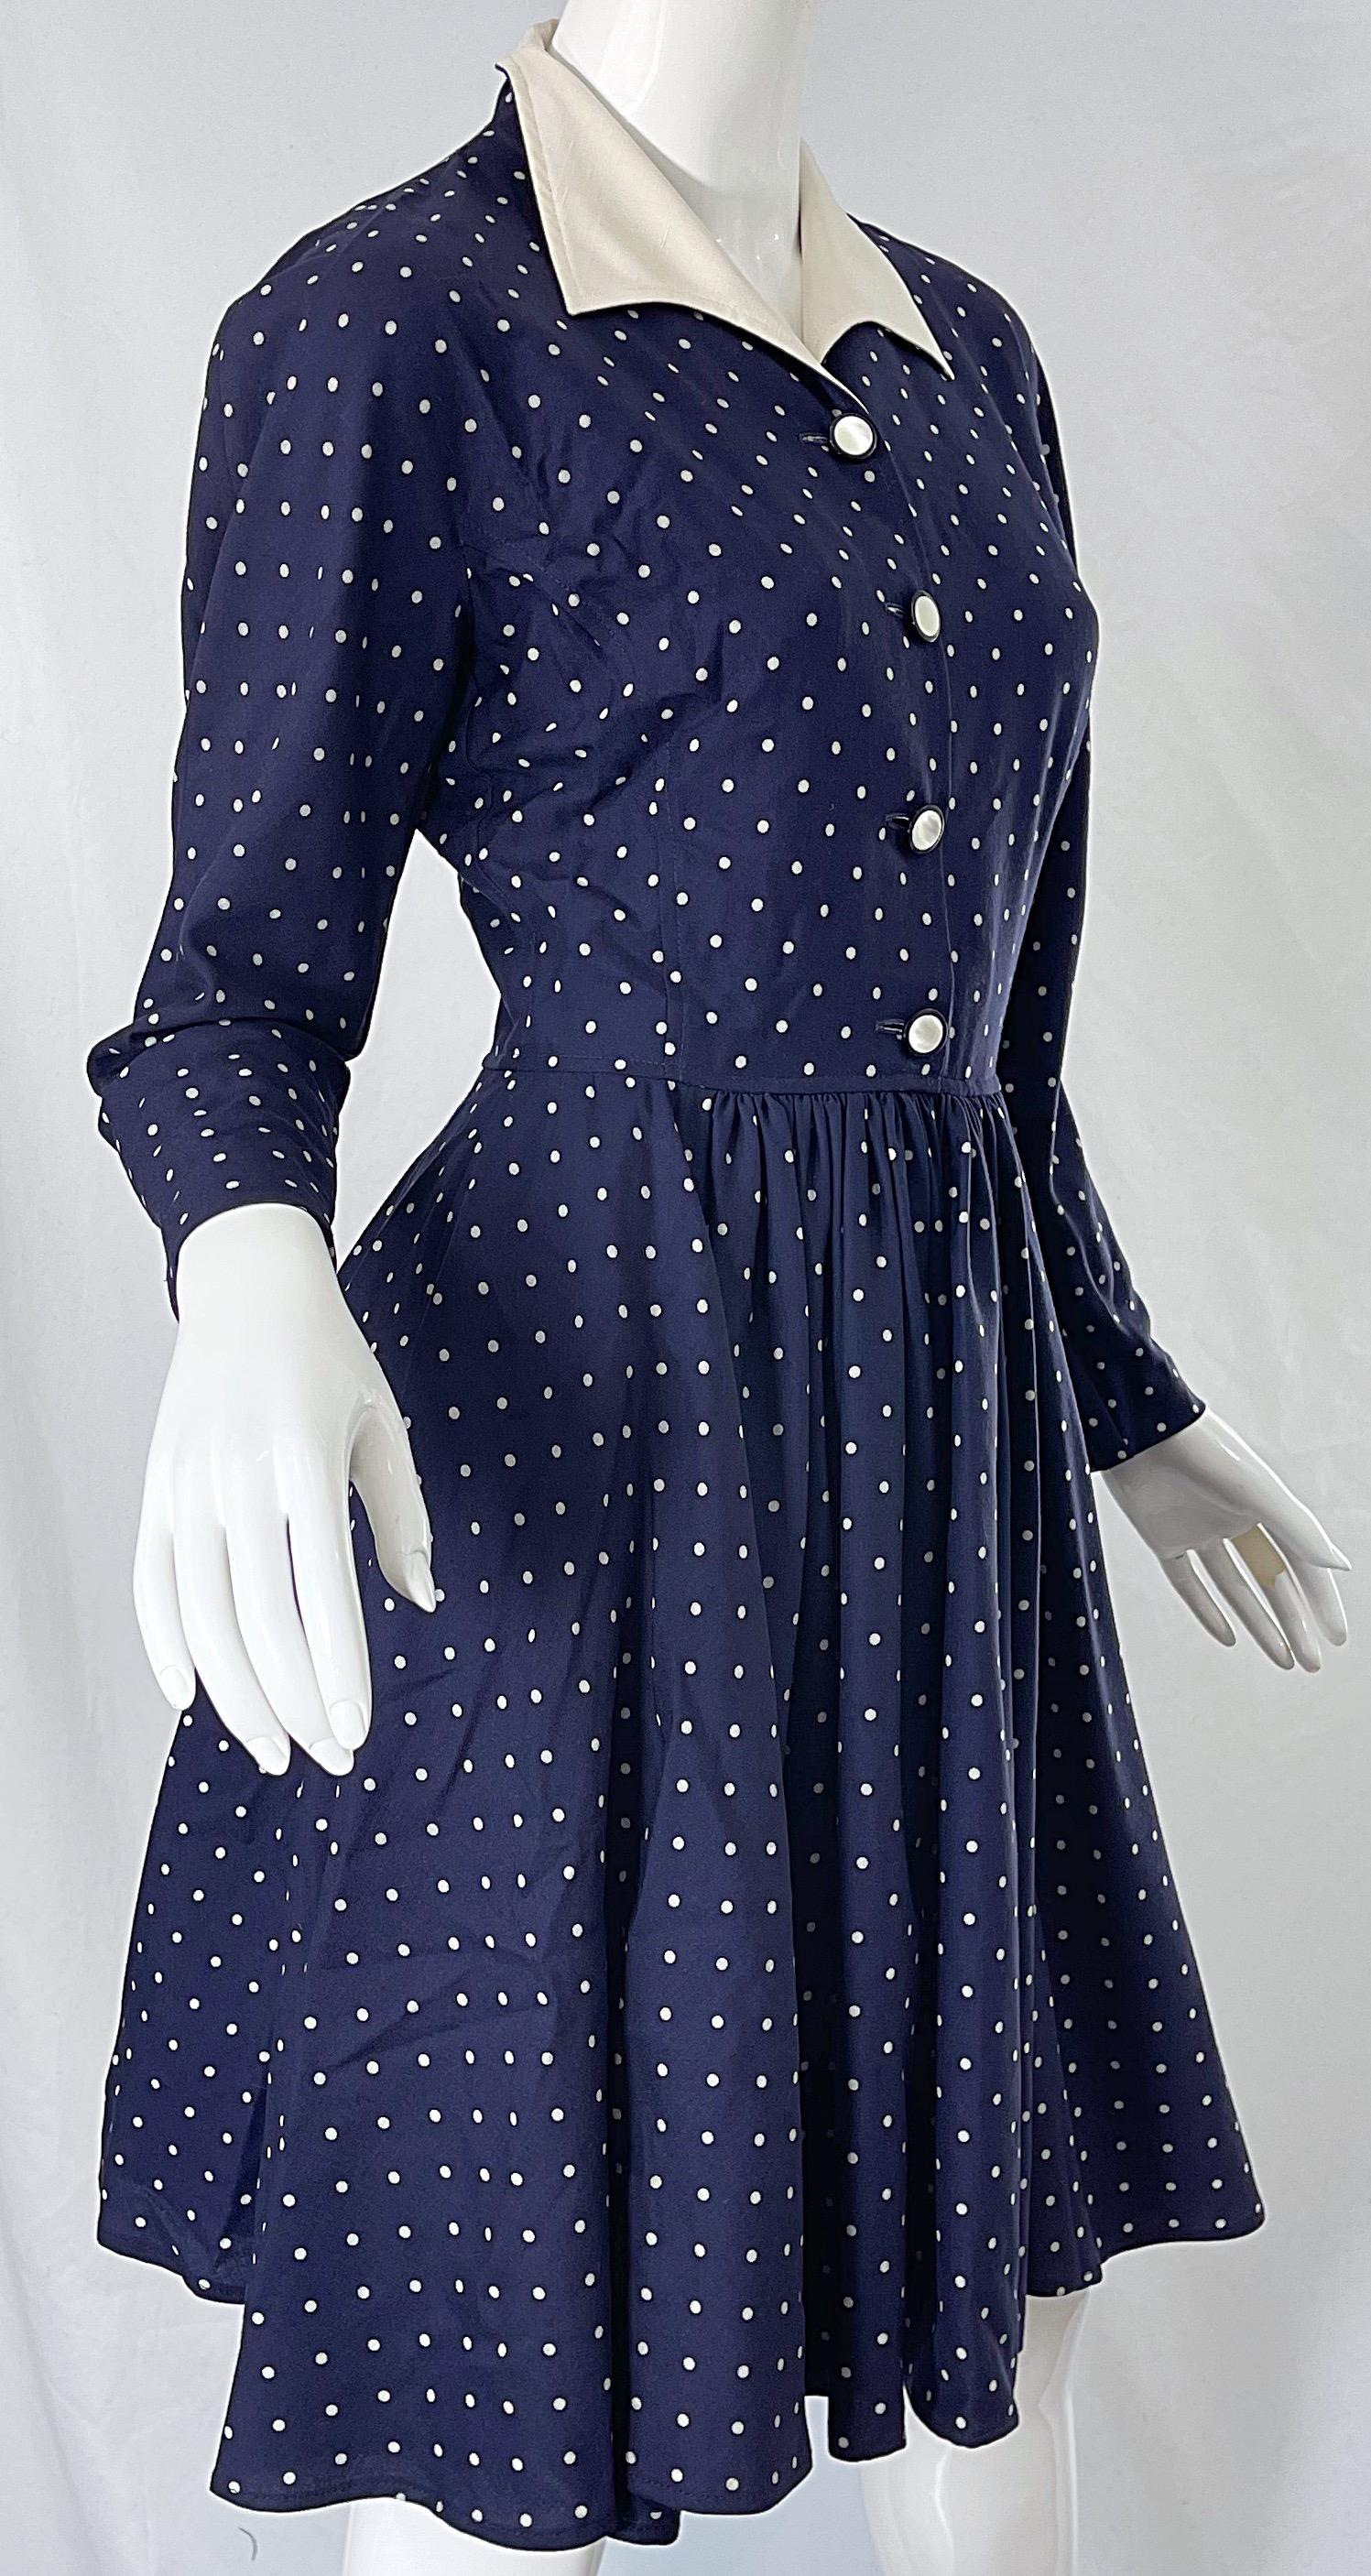 Vintage Valentino 1990s Does 1940s Size 4 navy Blue White Polka Dot 90s Dress In Excellent Condition For Sale In San Diego, CA